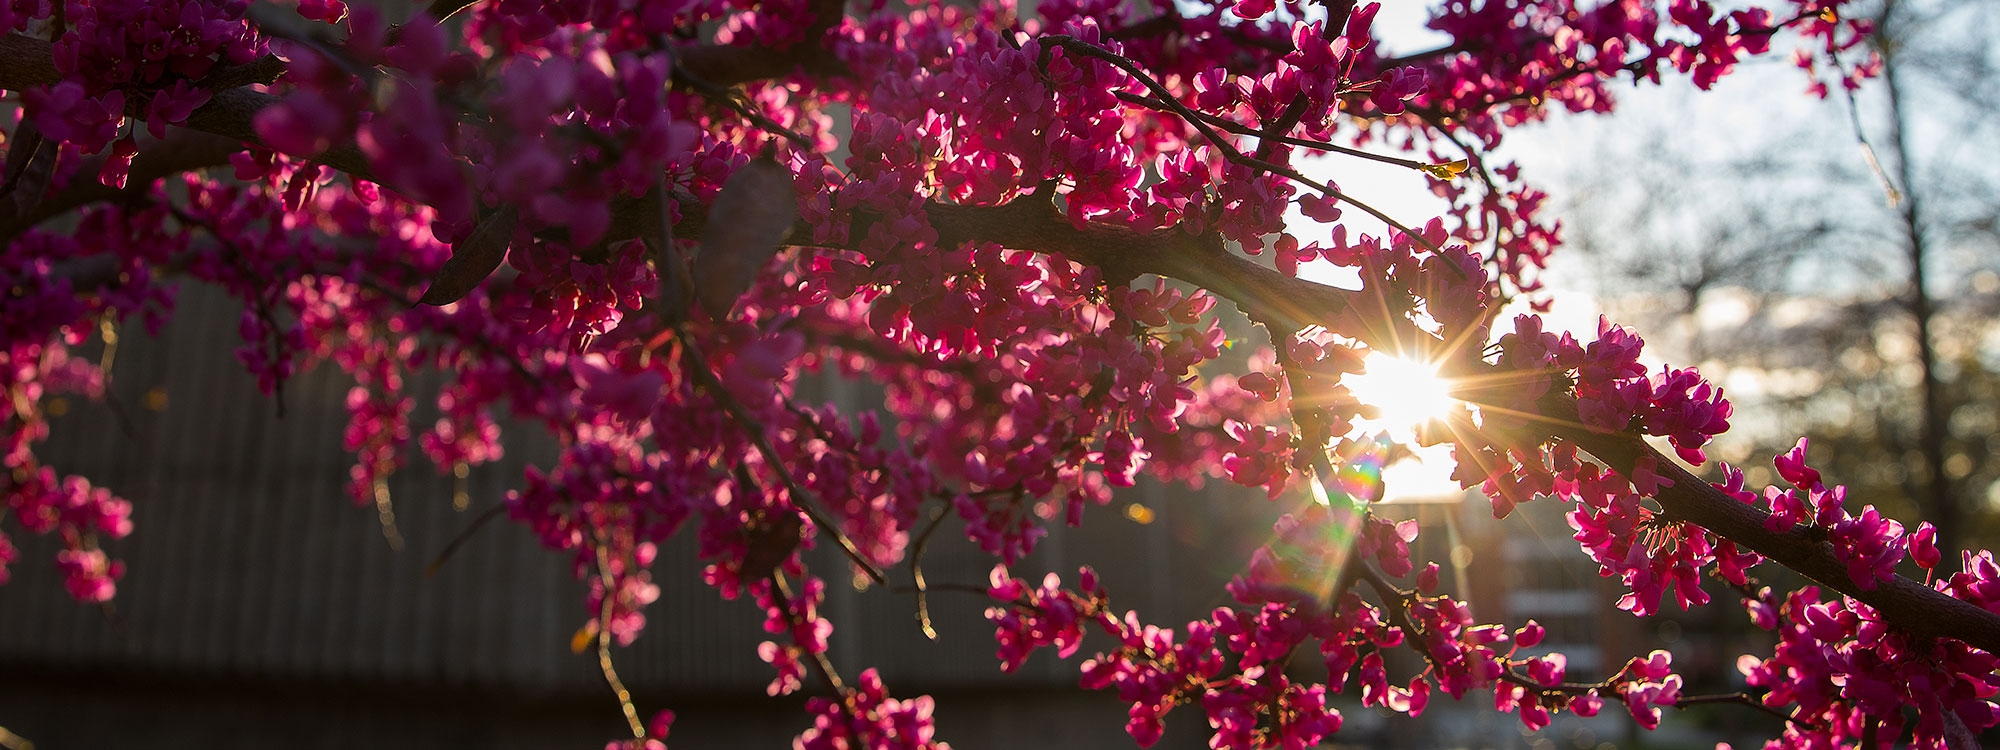 Closeup of pink blooming tree with the sun showing through the branches.